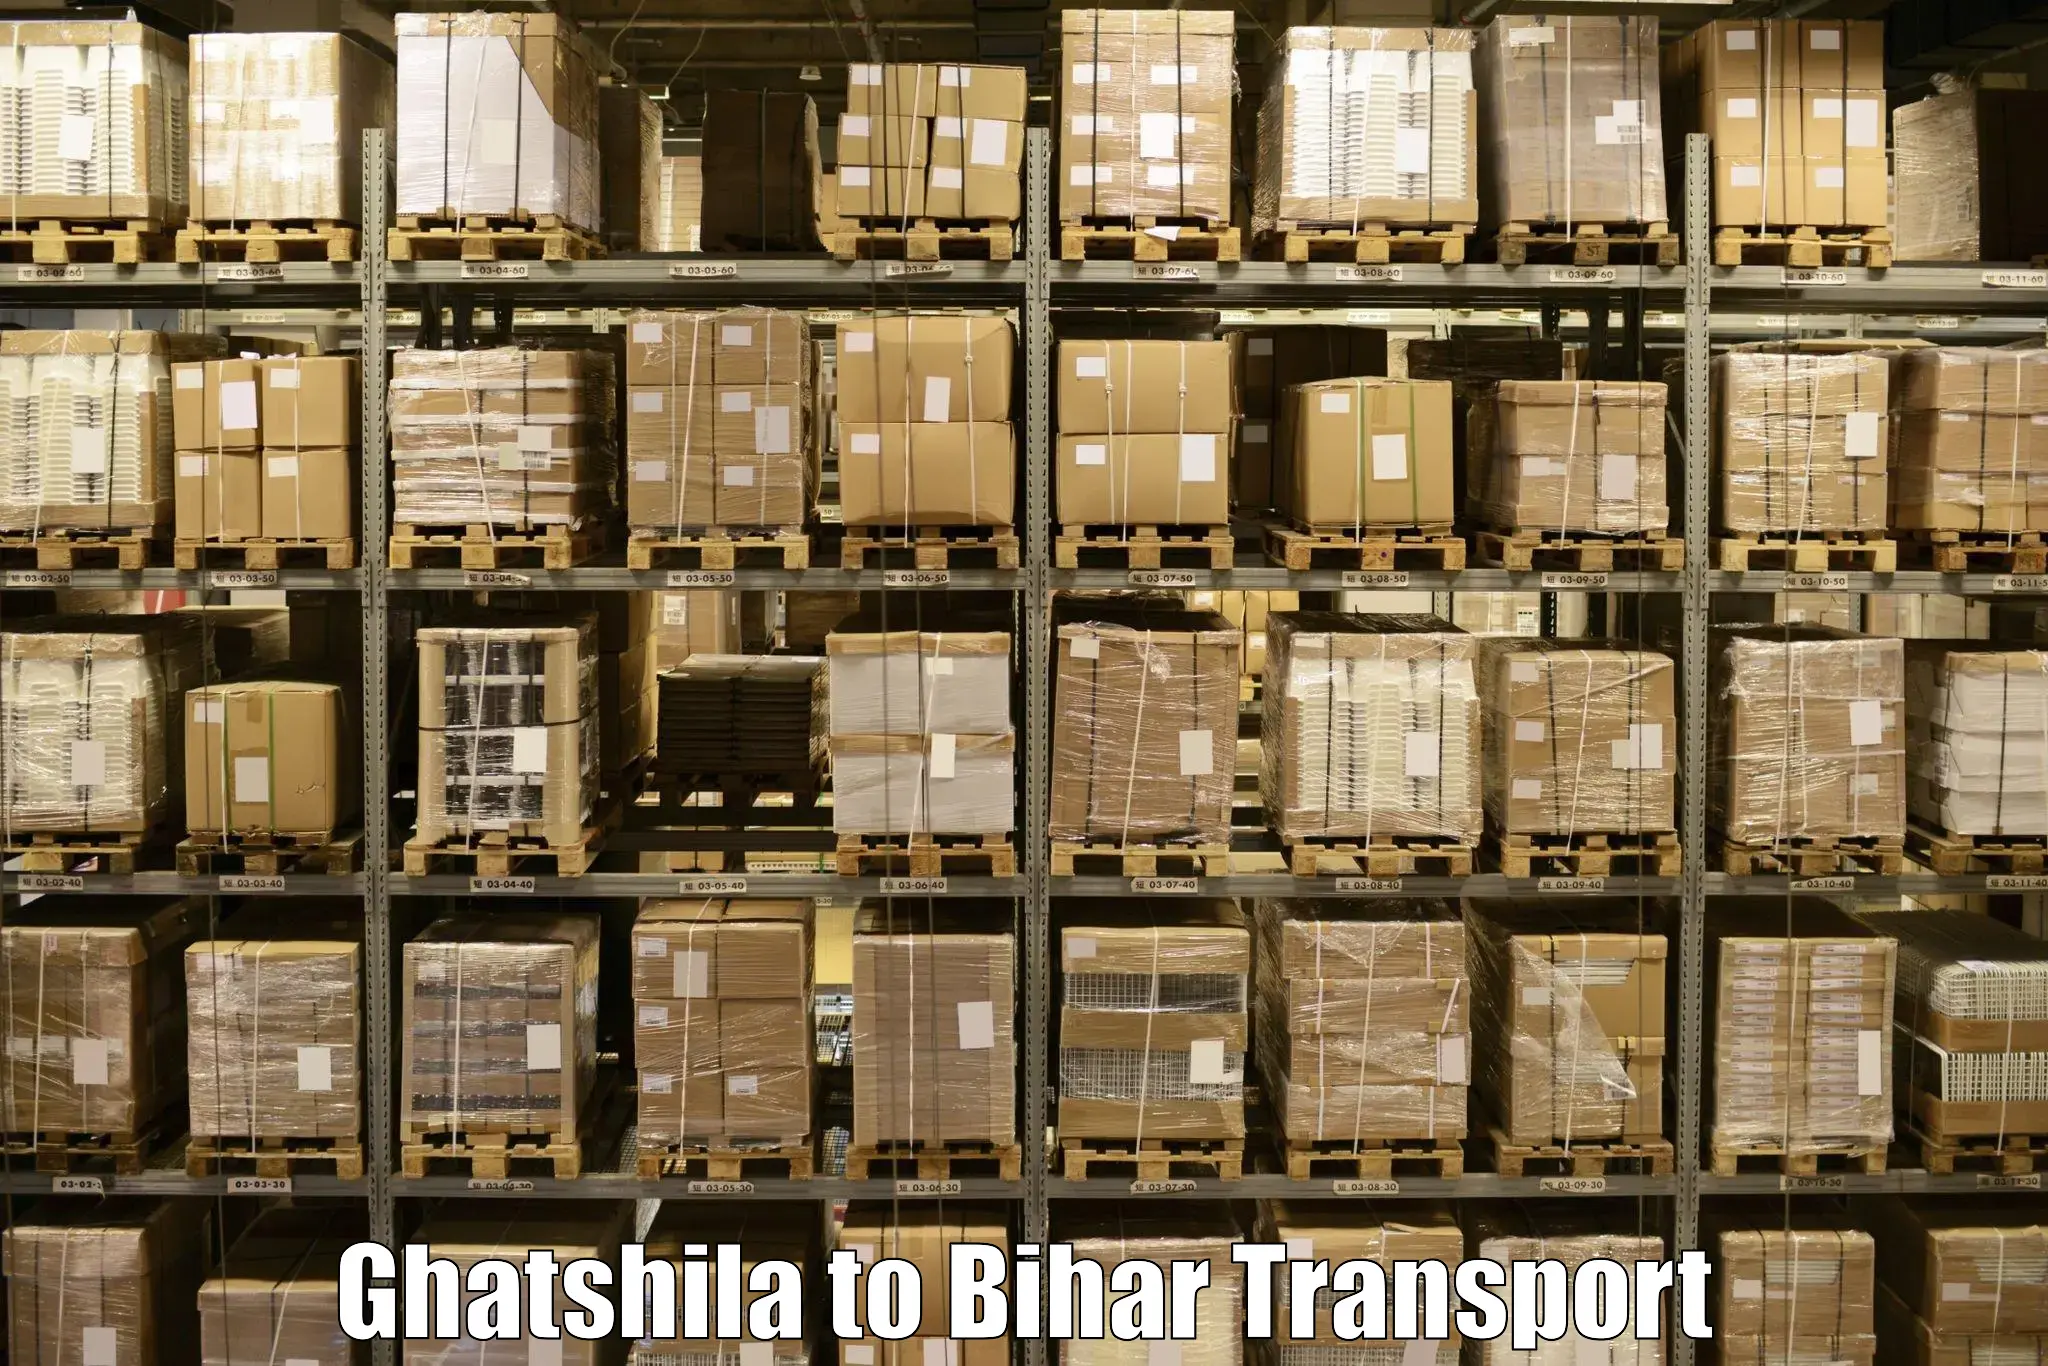 Express transport services Ghatshila to Mohammadpur